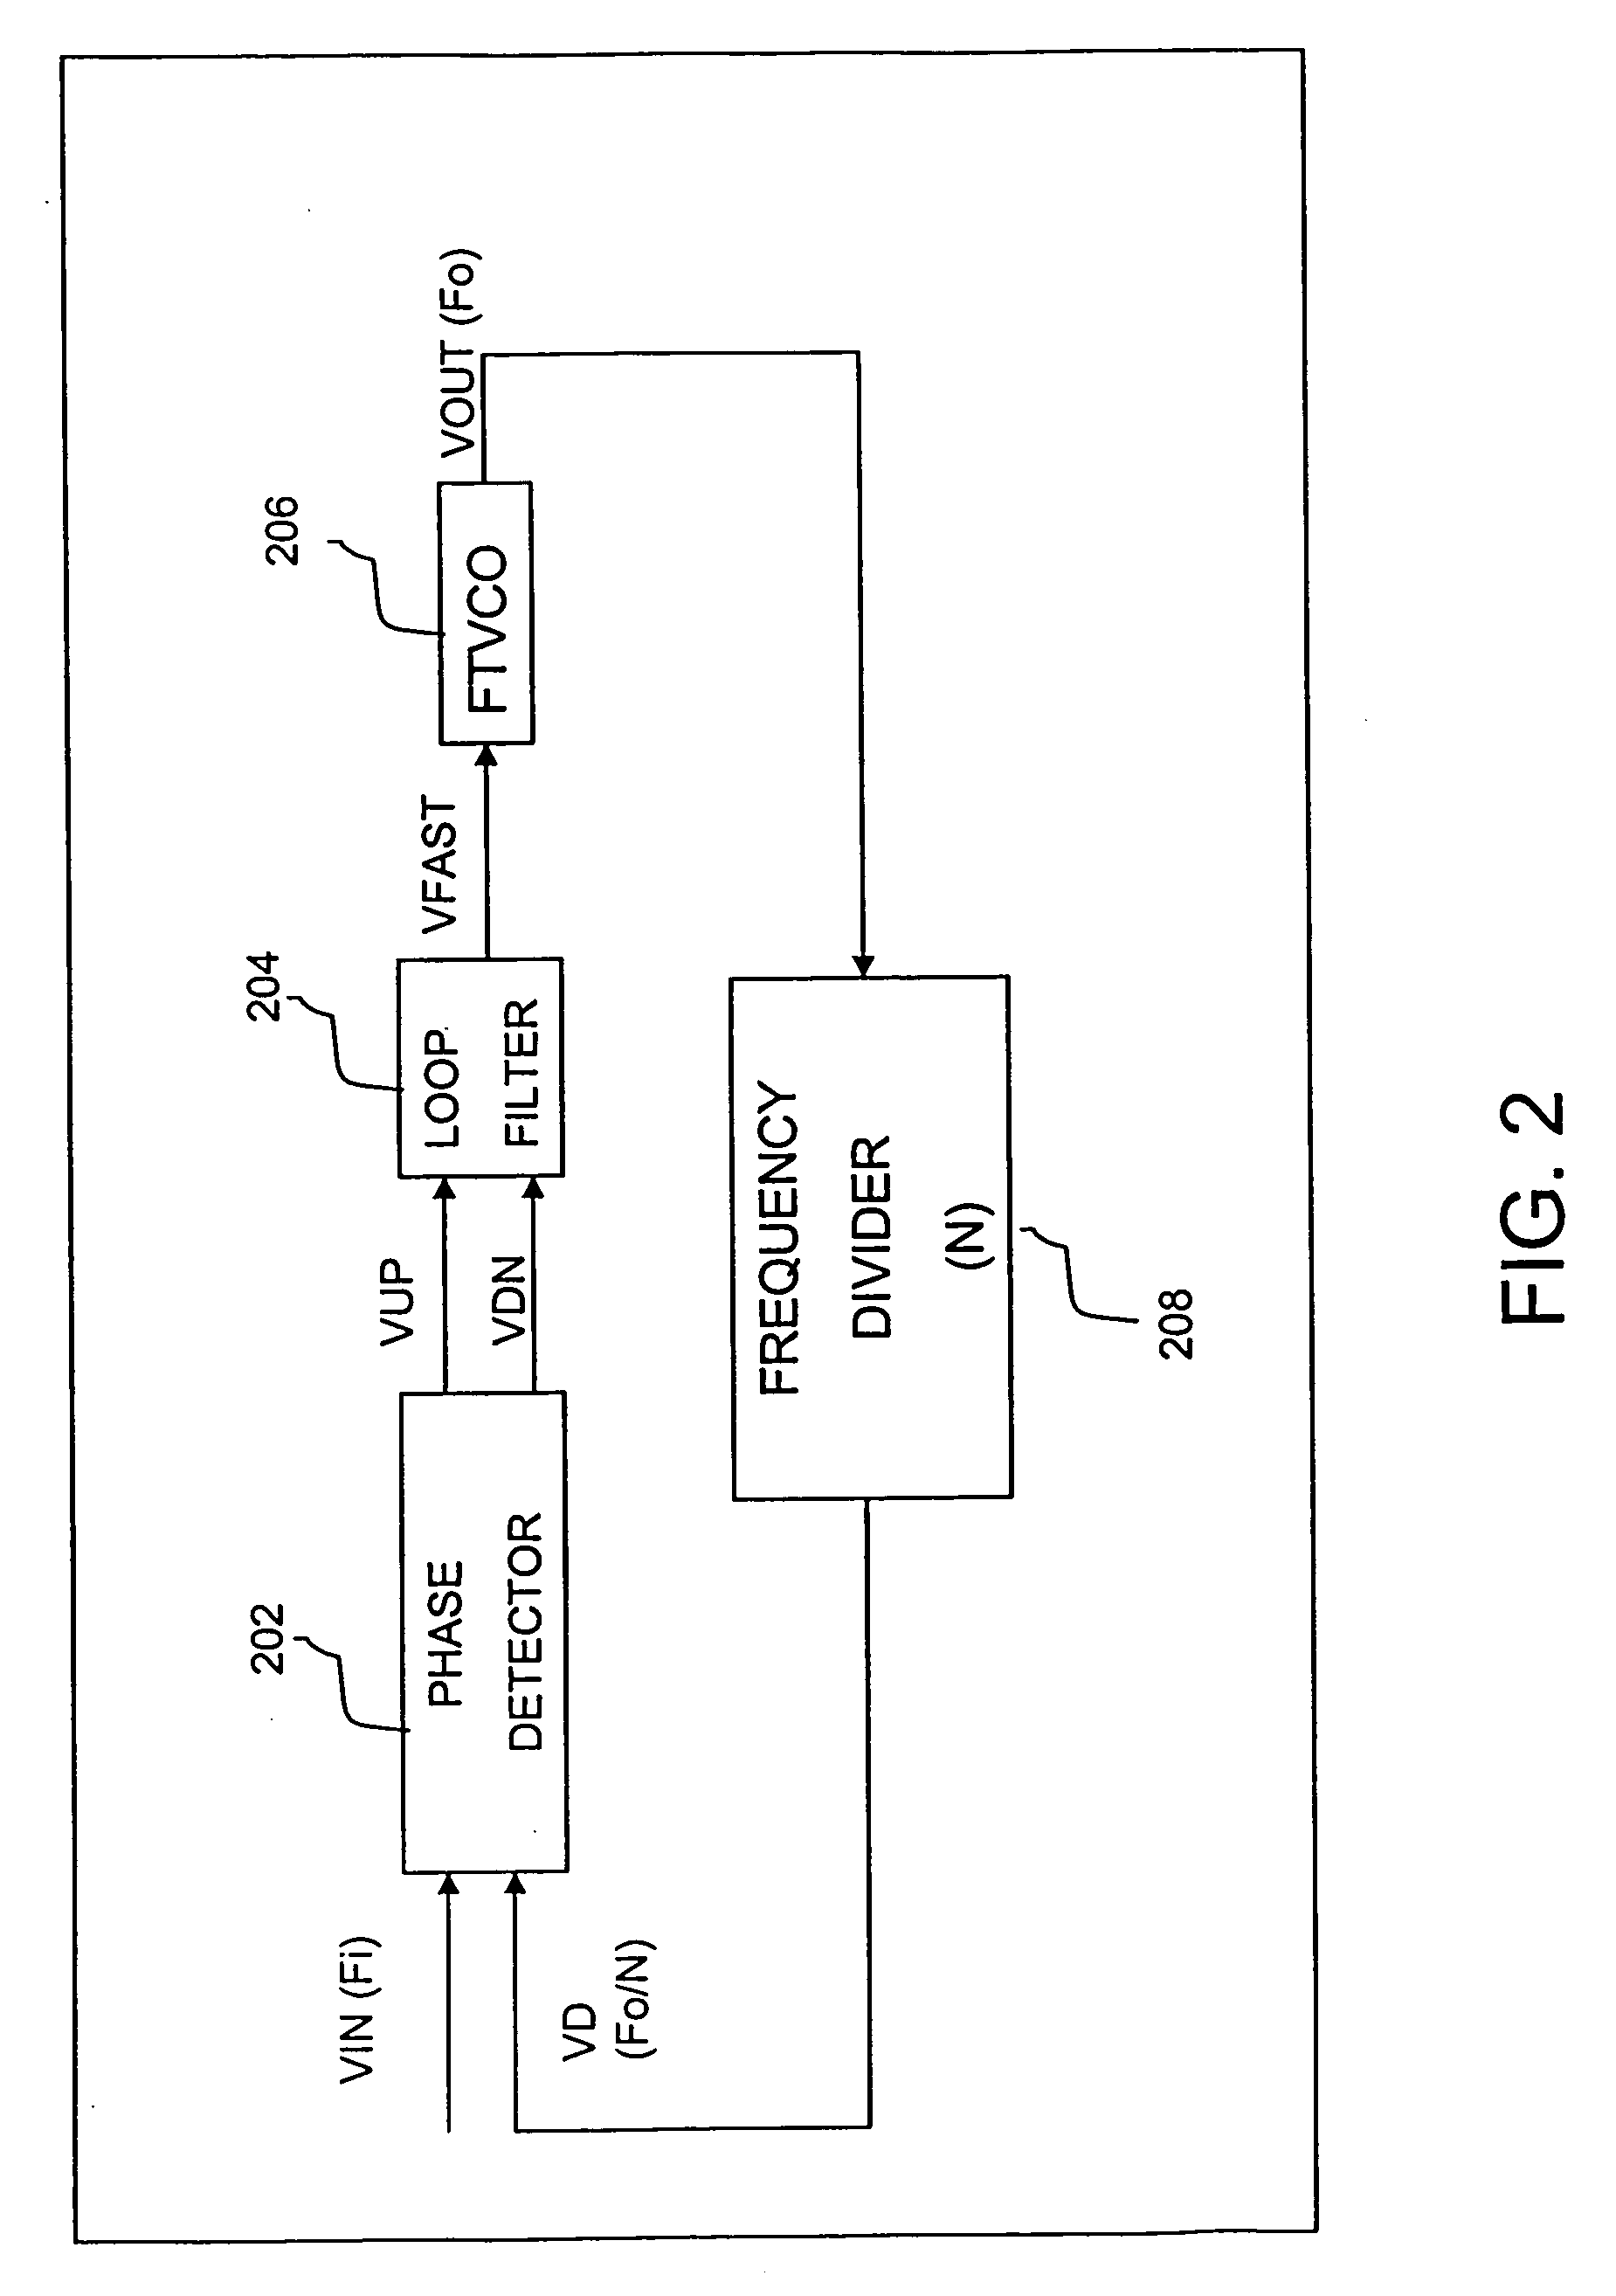 Voltage-controlled oscillator with four terminal varactors